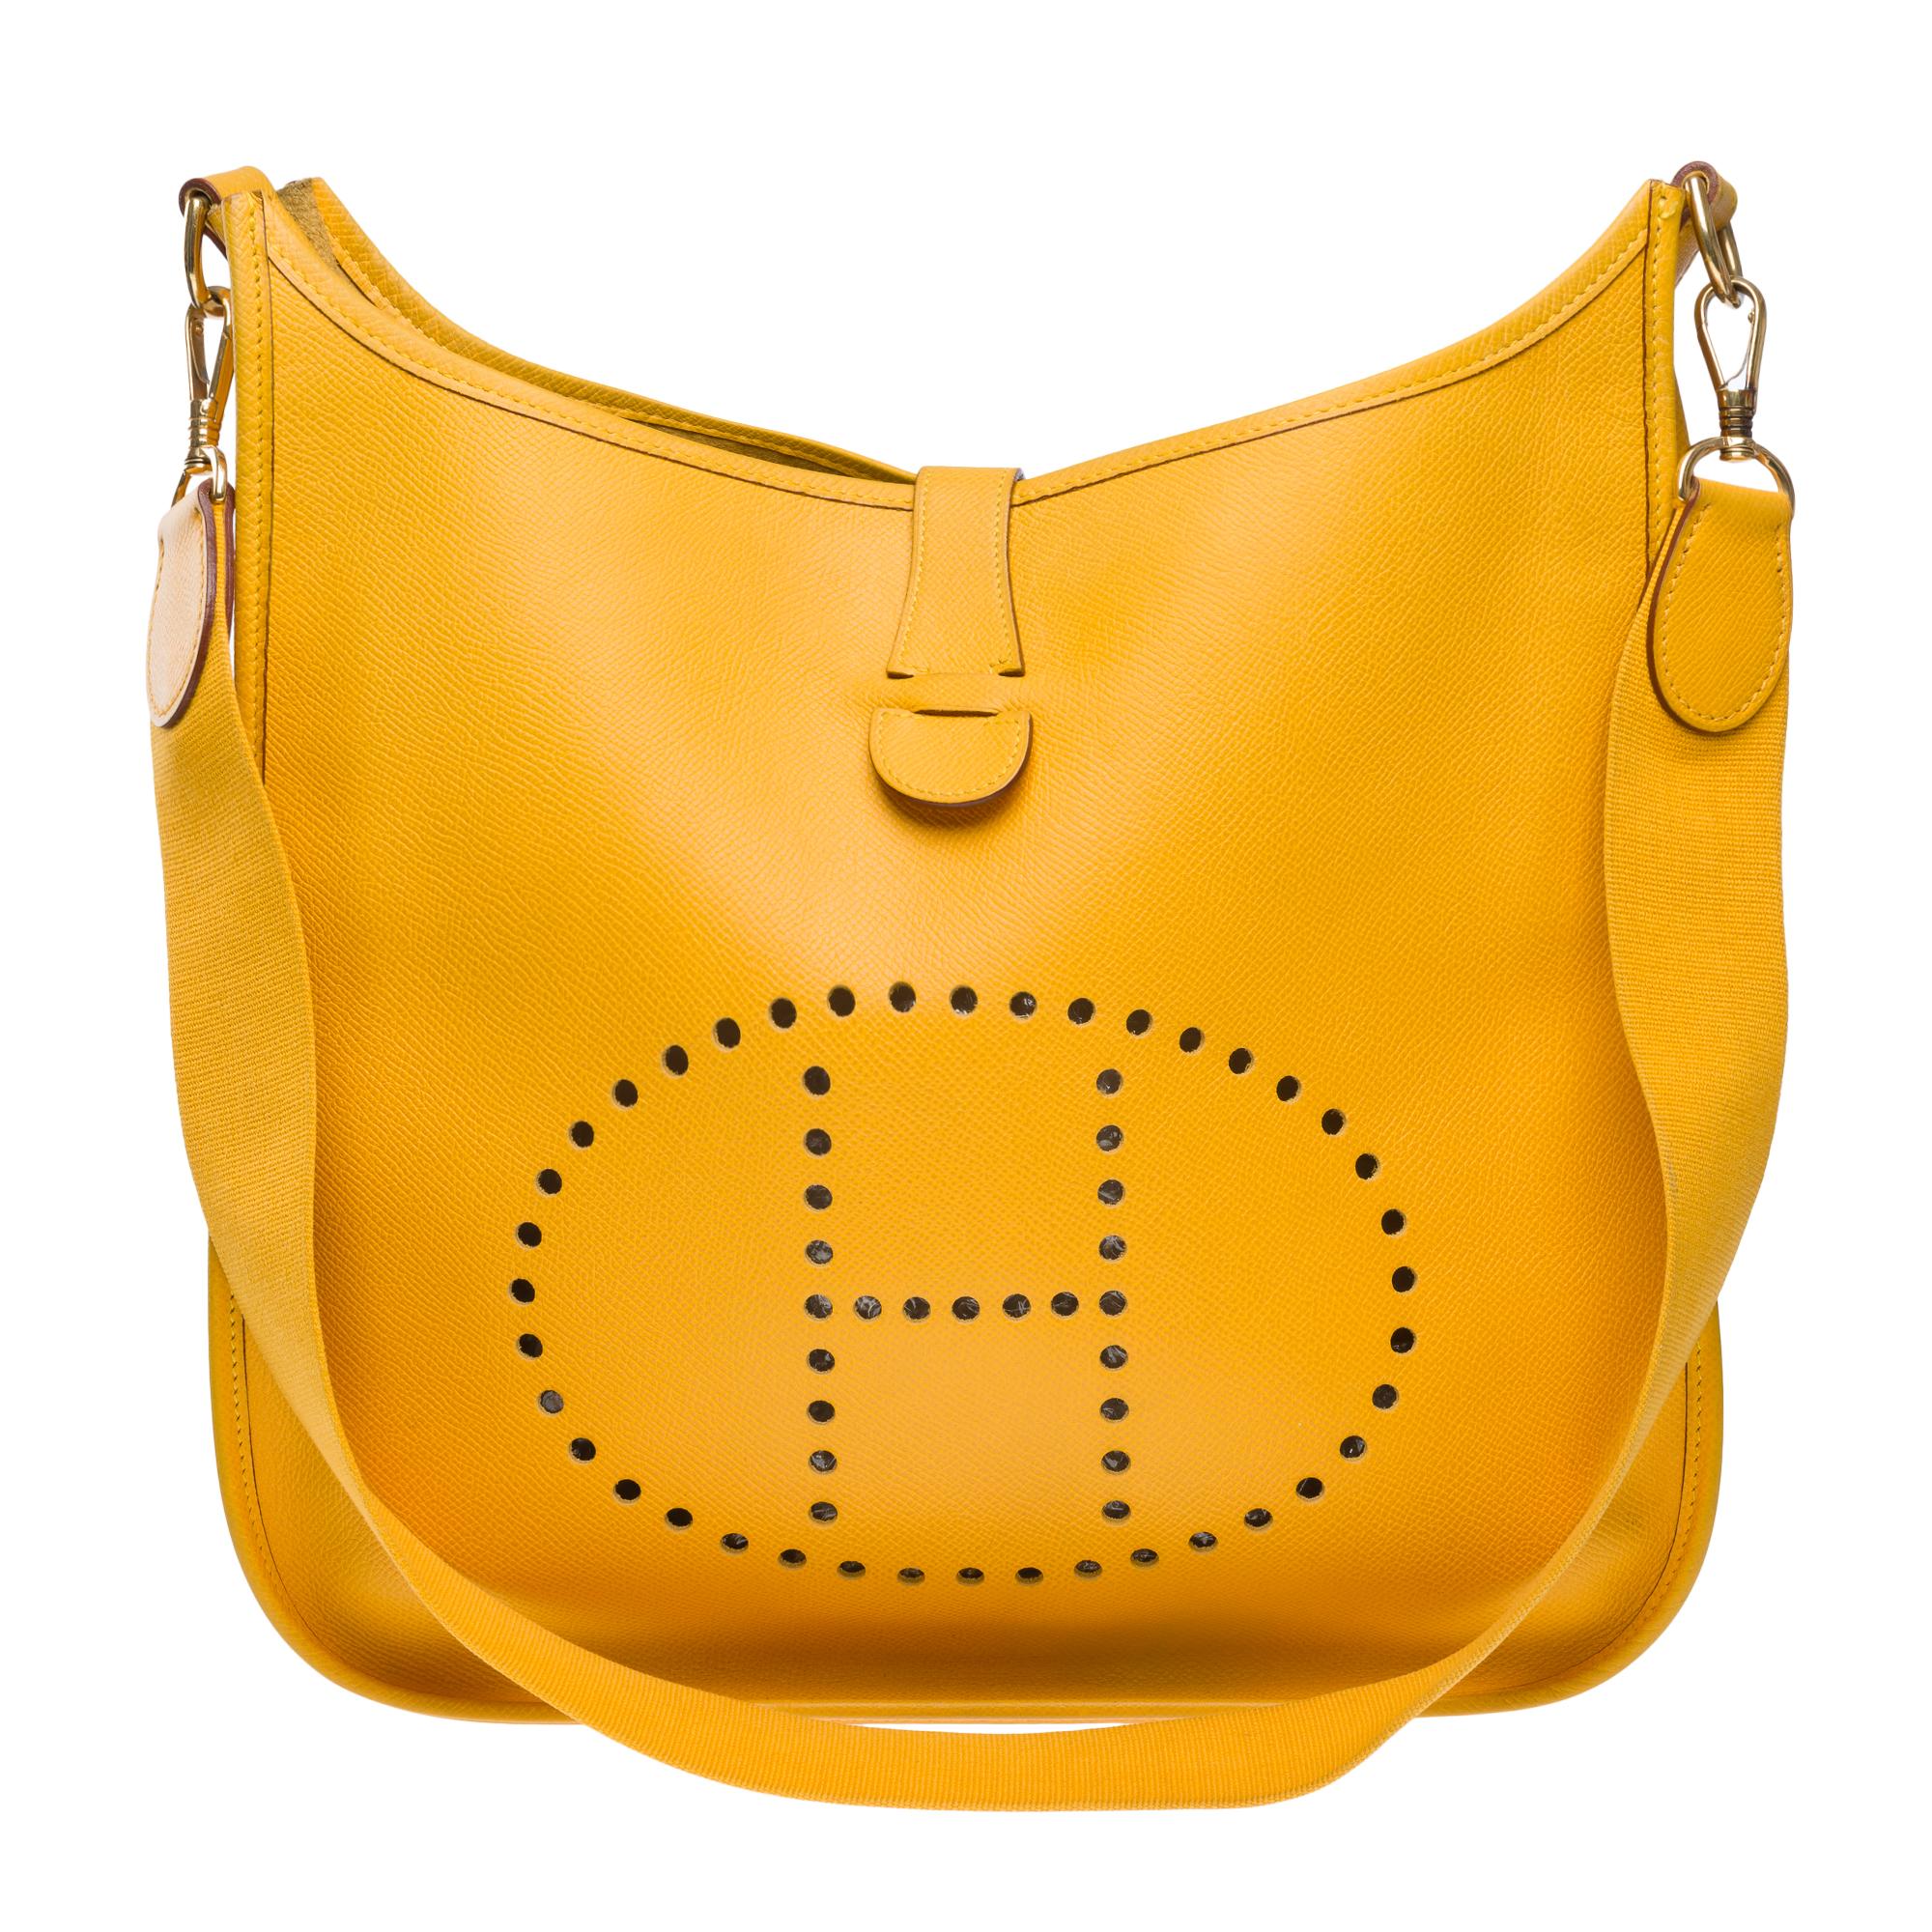 Hermès Evelyne 33 (GM)  shoulder bag in Yellow Gold Courchevel leather, GHW 5